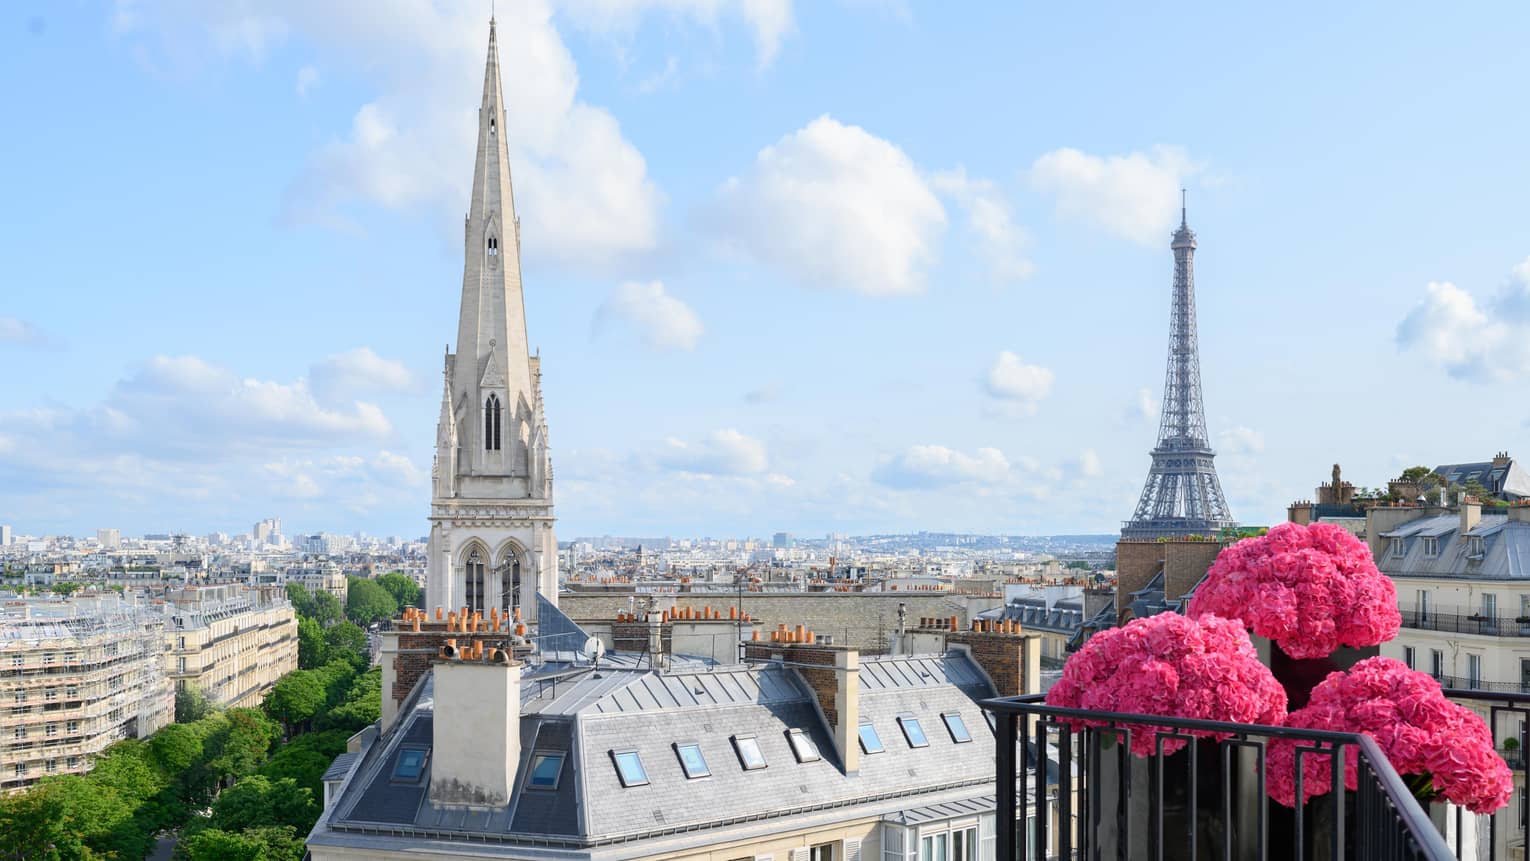 Pink flowers on balcony in front of Paris rooftops, cathedral and blue sky